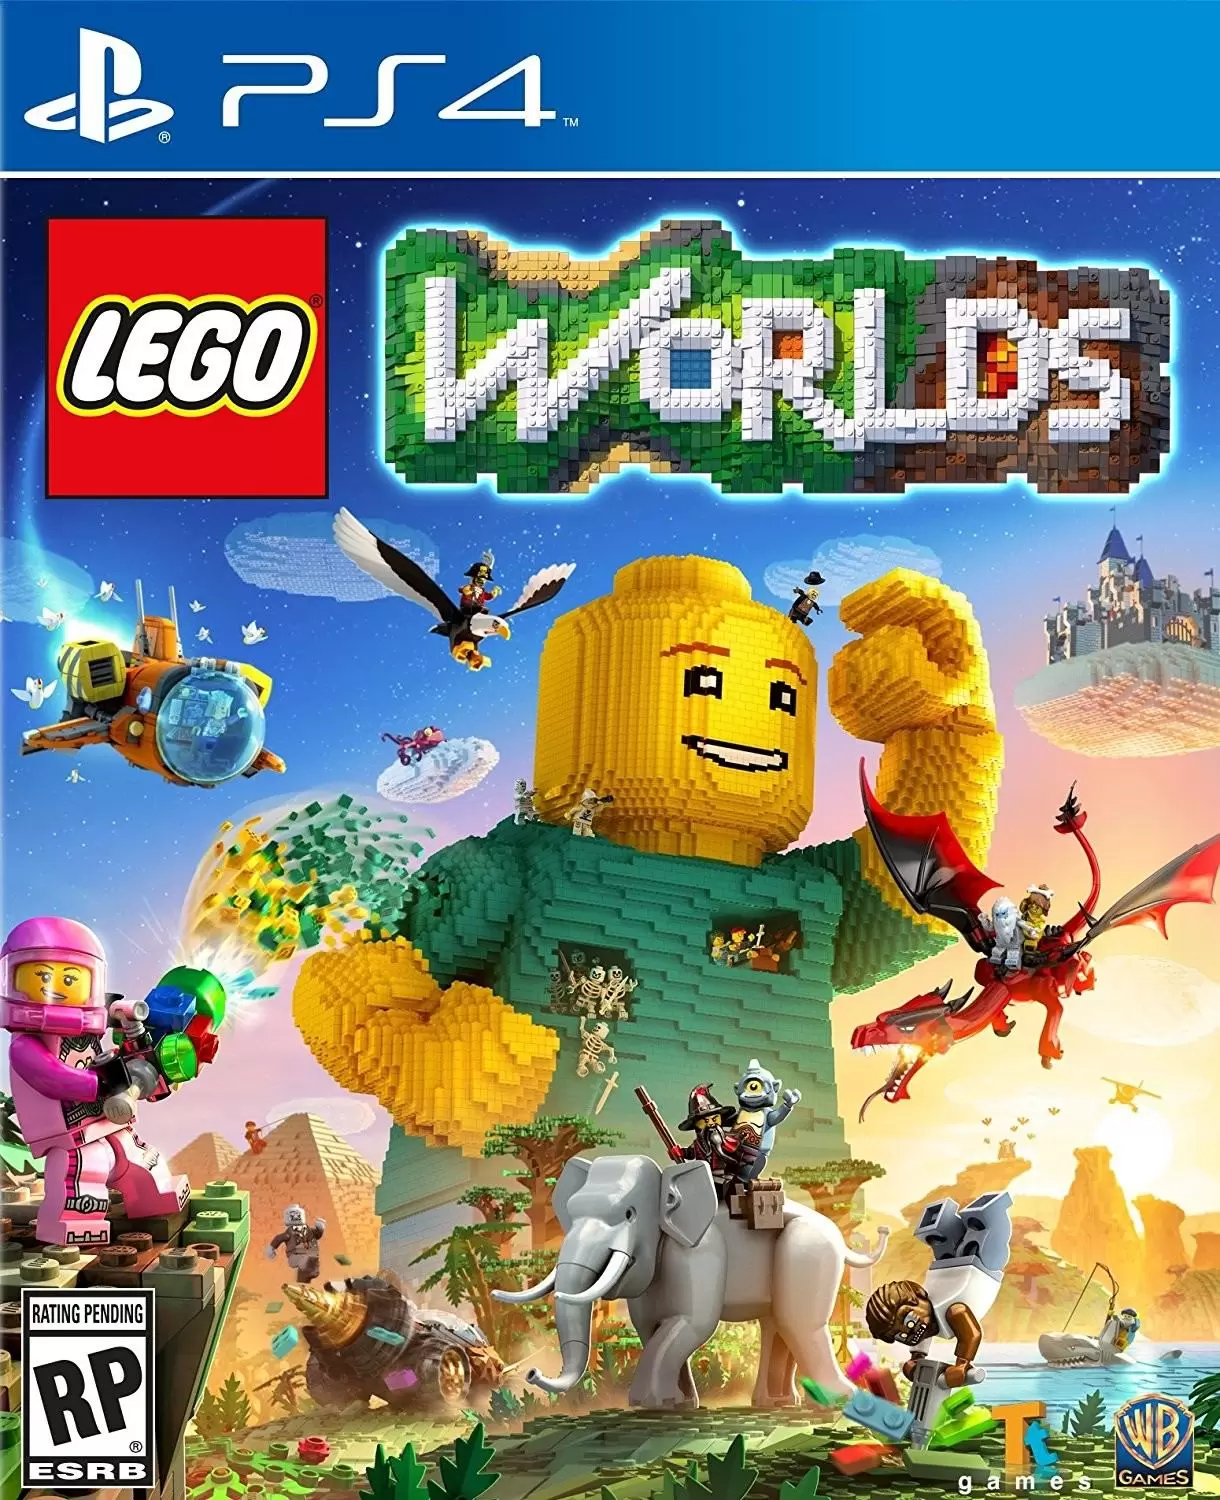 PS4 Games - LEGO Worlds